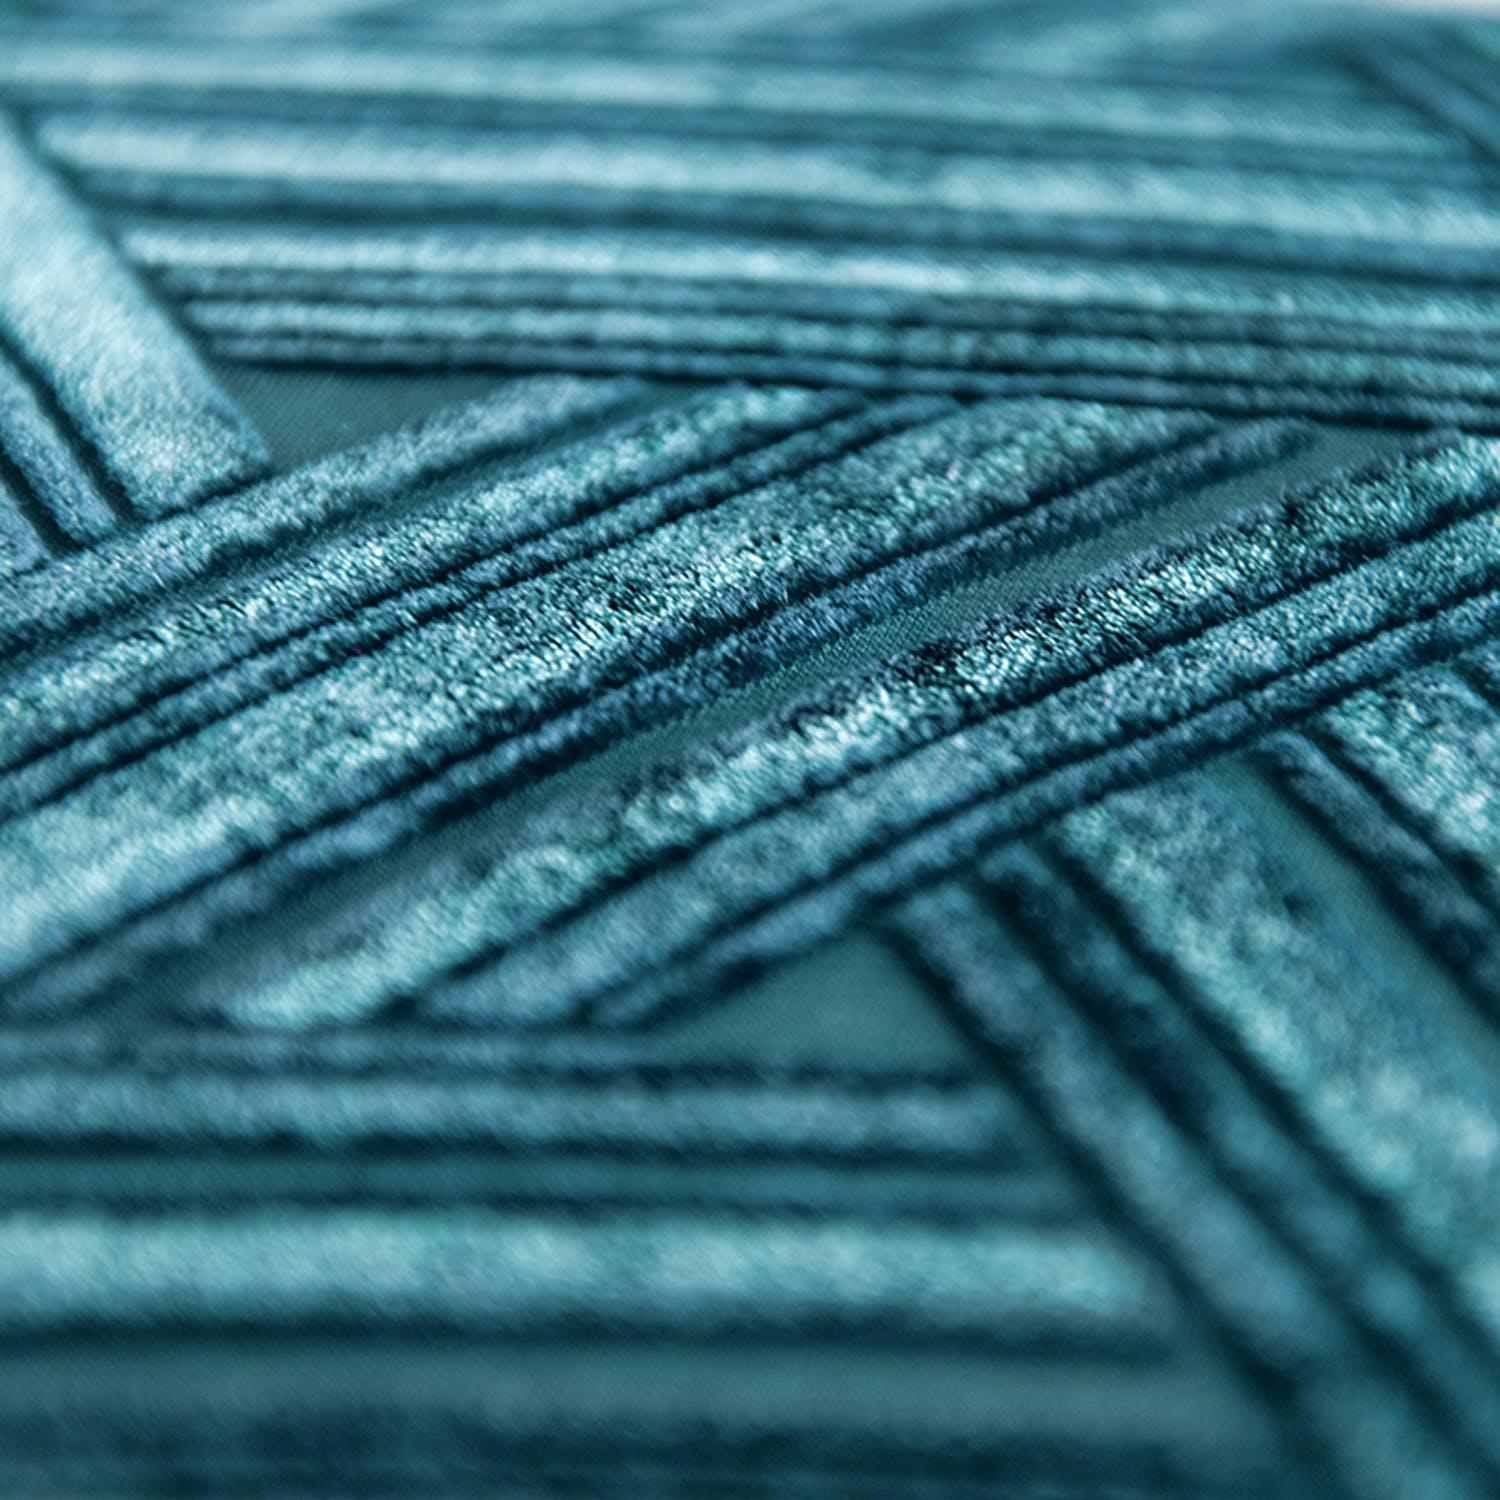 Close-up of teal textured material displays intricate linear patterns.